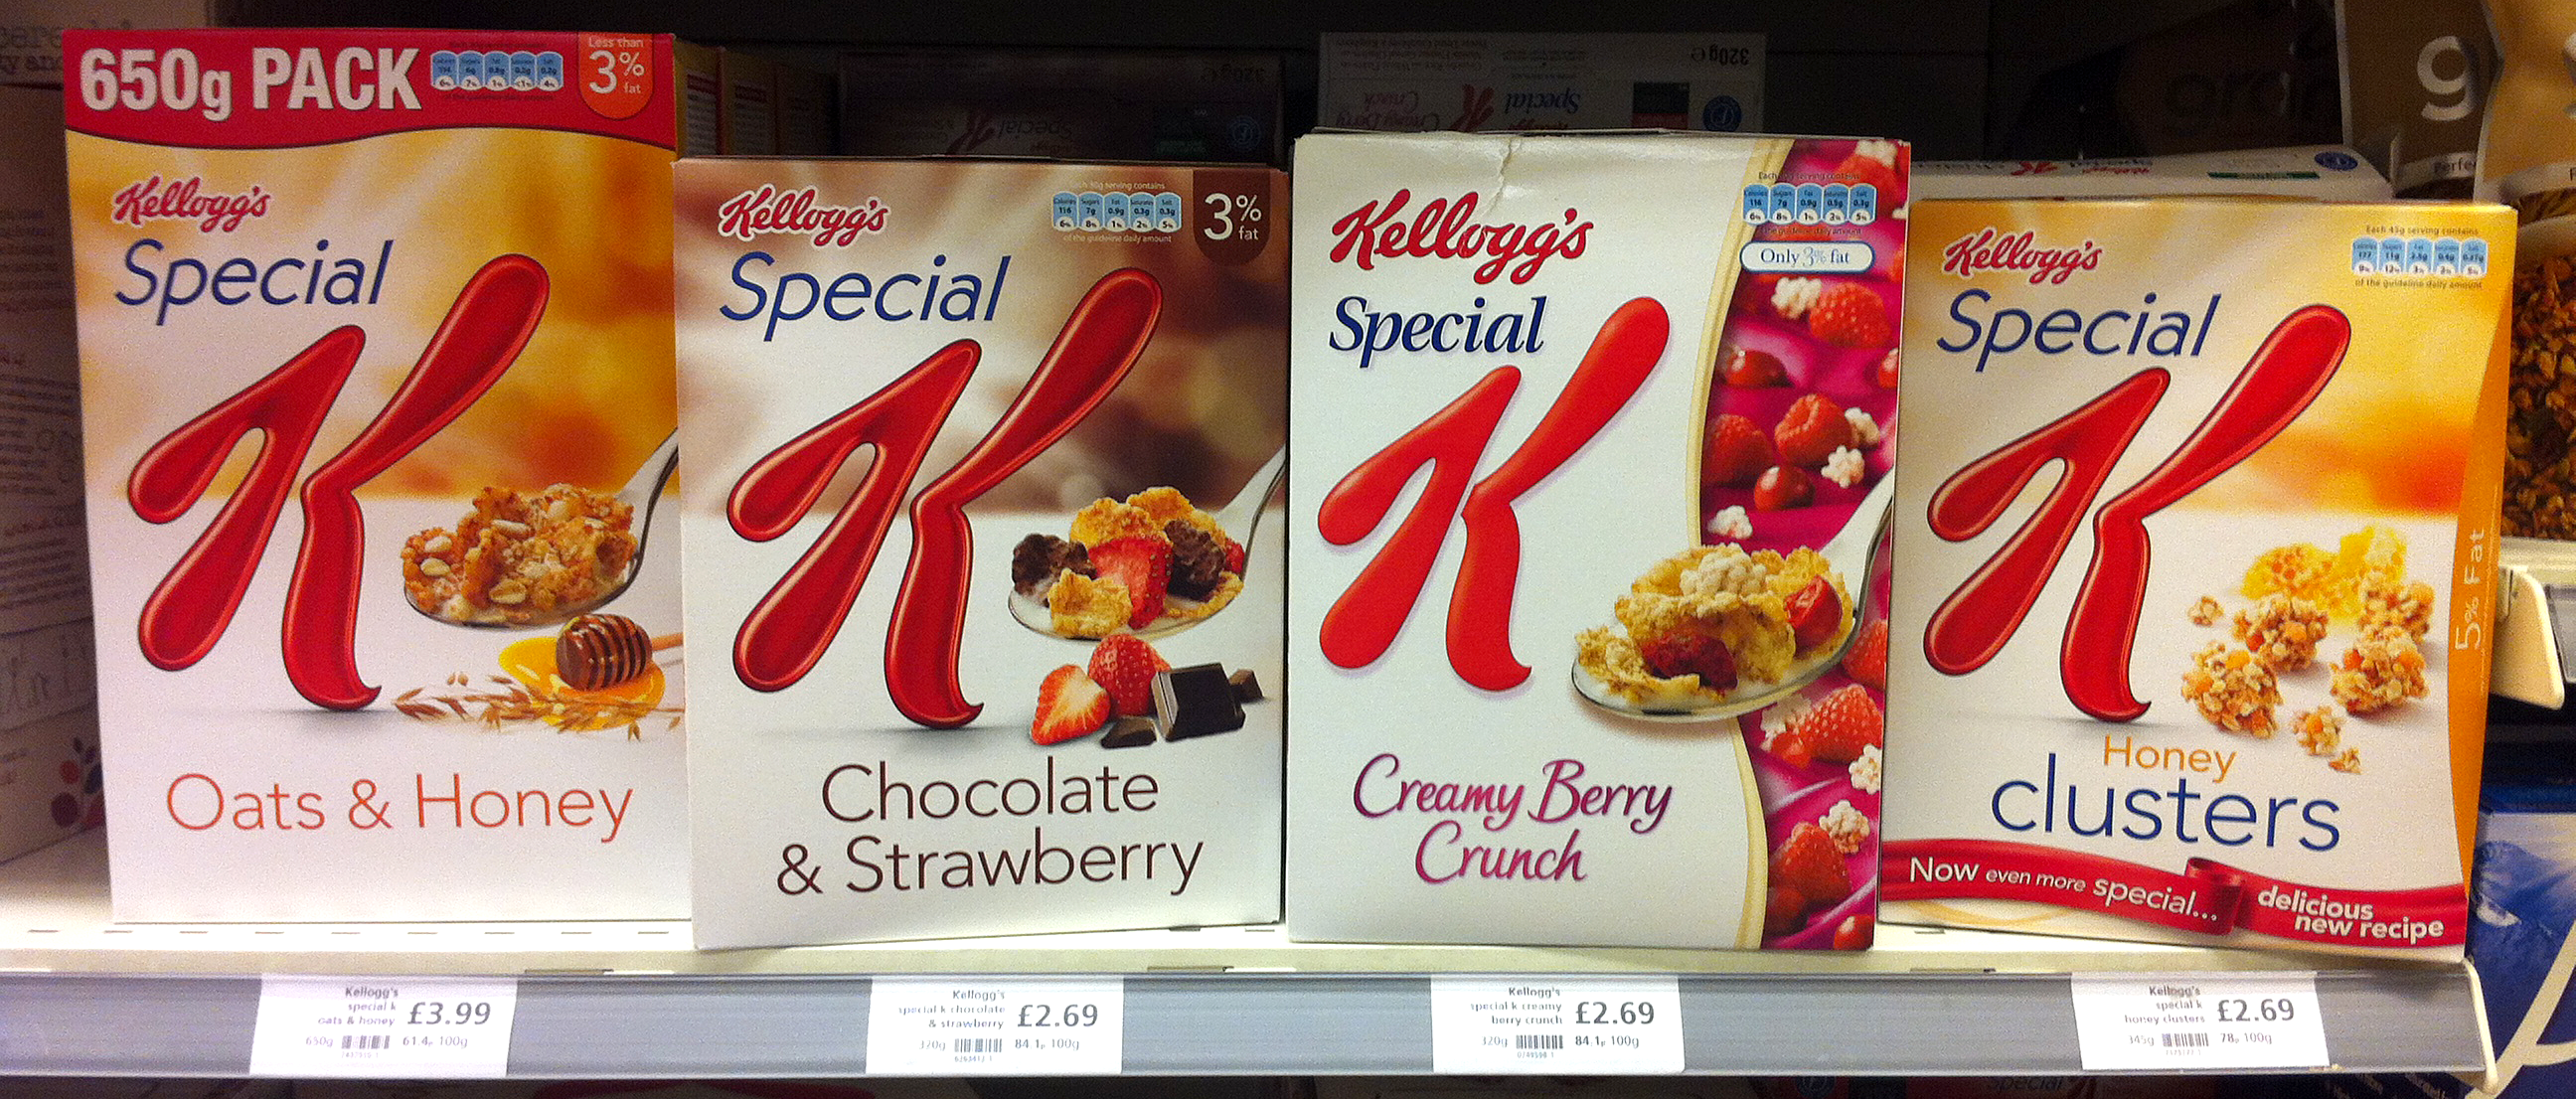 Hey Special K, what is wrong with this picture?